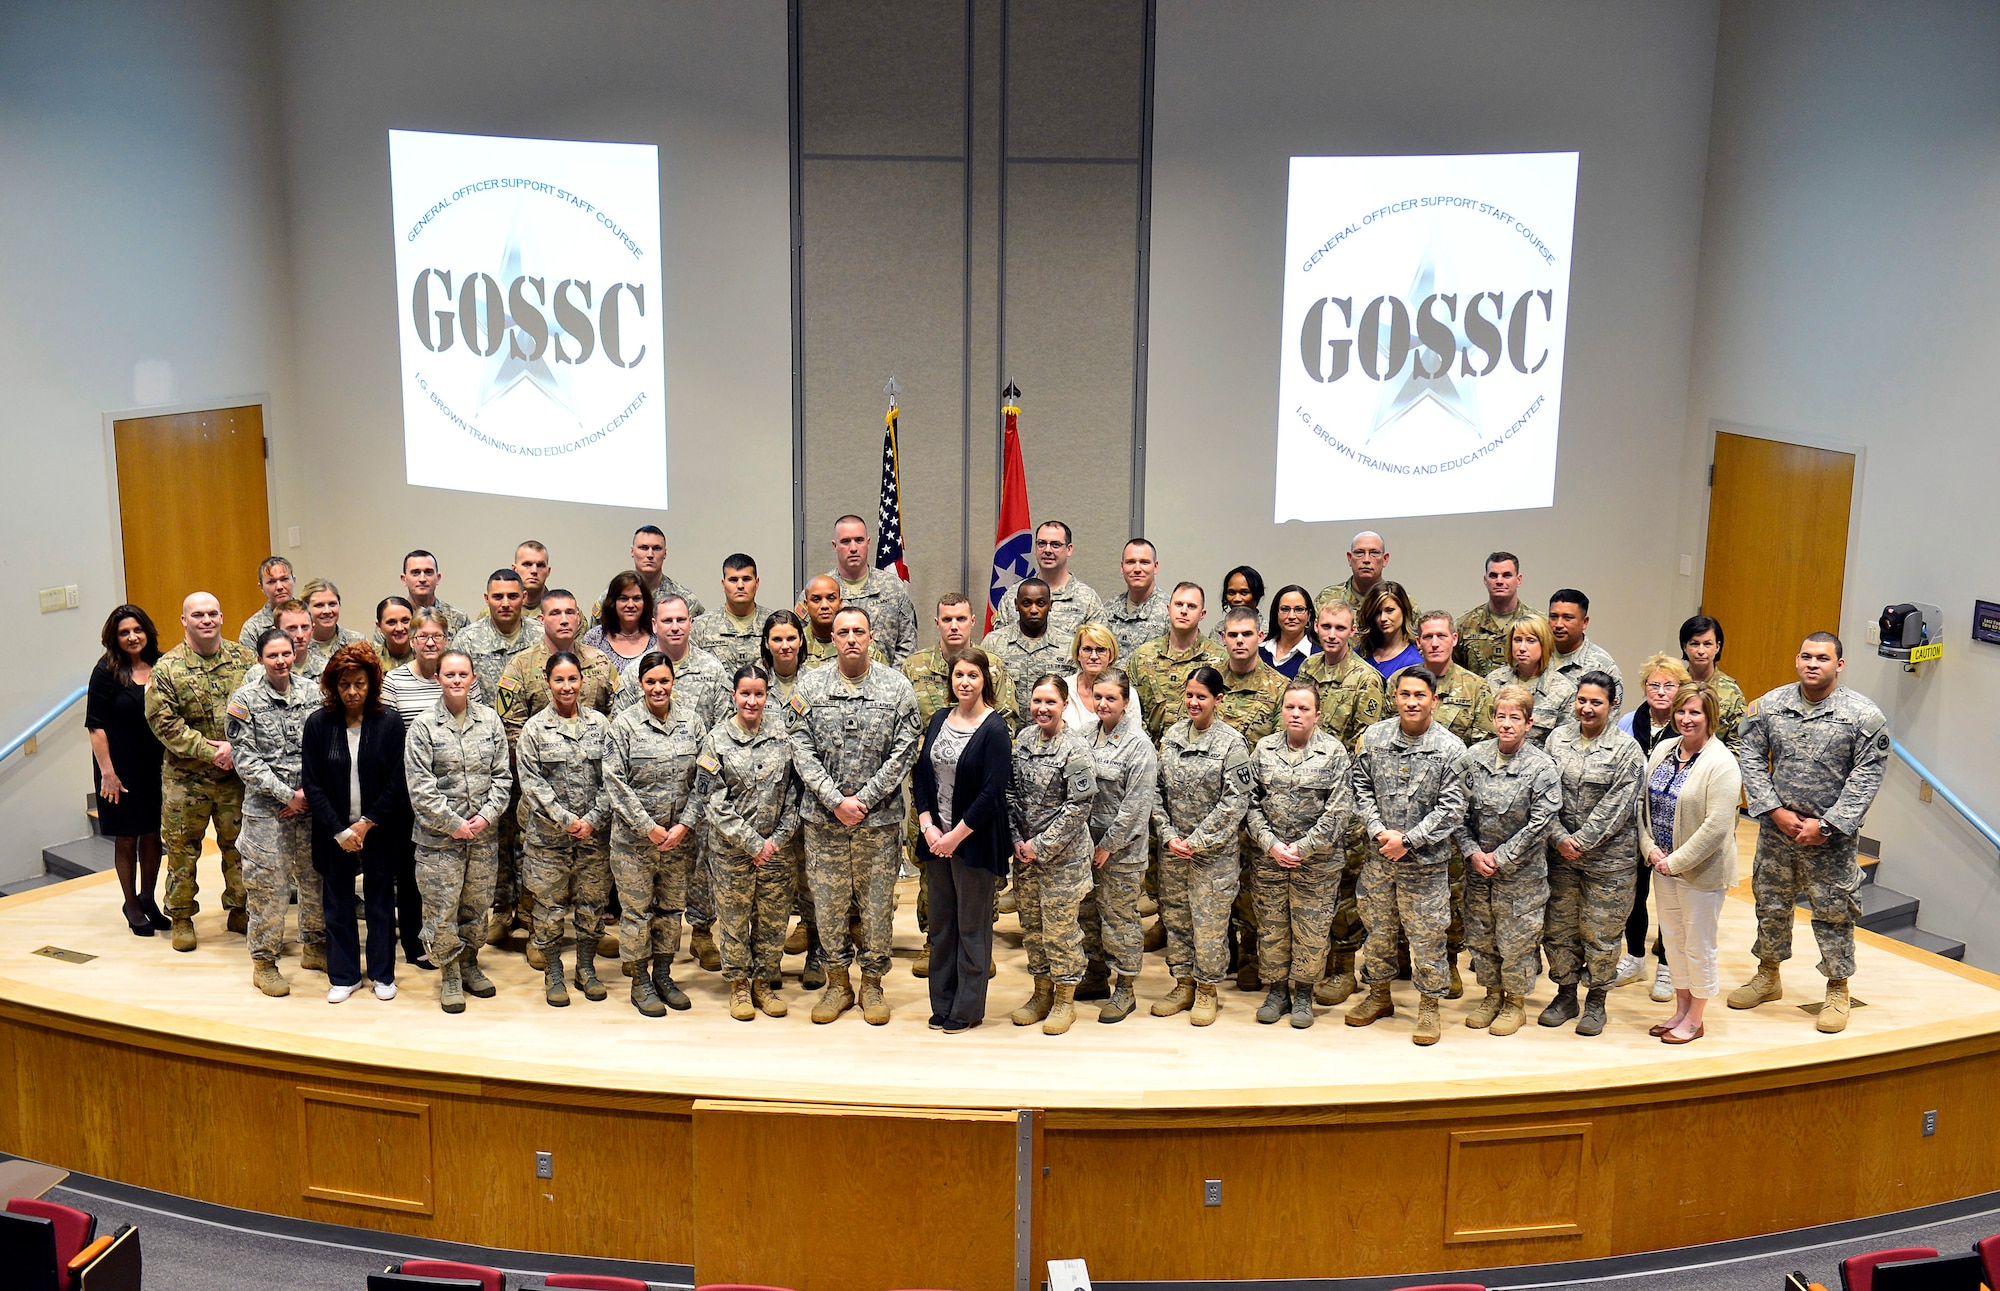 MCGHEE TYSON AIR NATIONAL GUARD BASE, Tenn. - Soldiers, Airmen and civilians assigned to general officers take a group photo at the I.G. Brown Training and Education Center here March 15, 2016, during the General Officer Support Staff Course. (U.S. Air National Guard photo by Master Sgt. Jerry Harlan/Released)